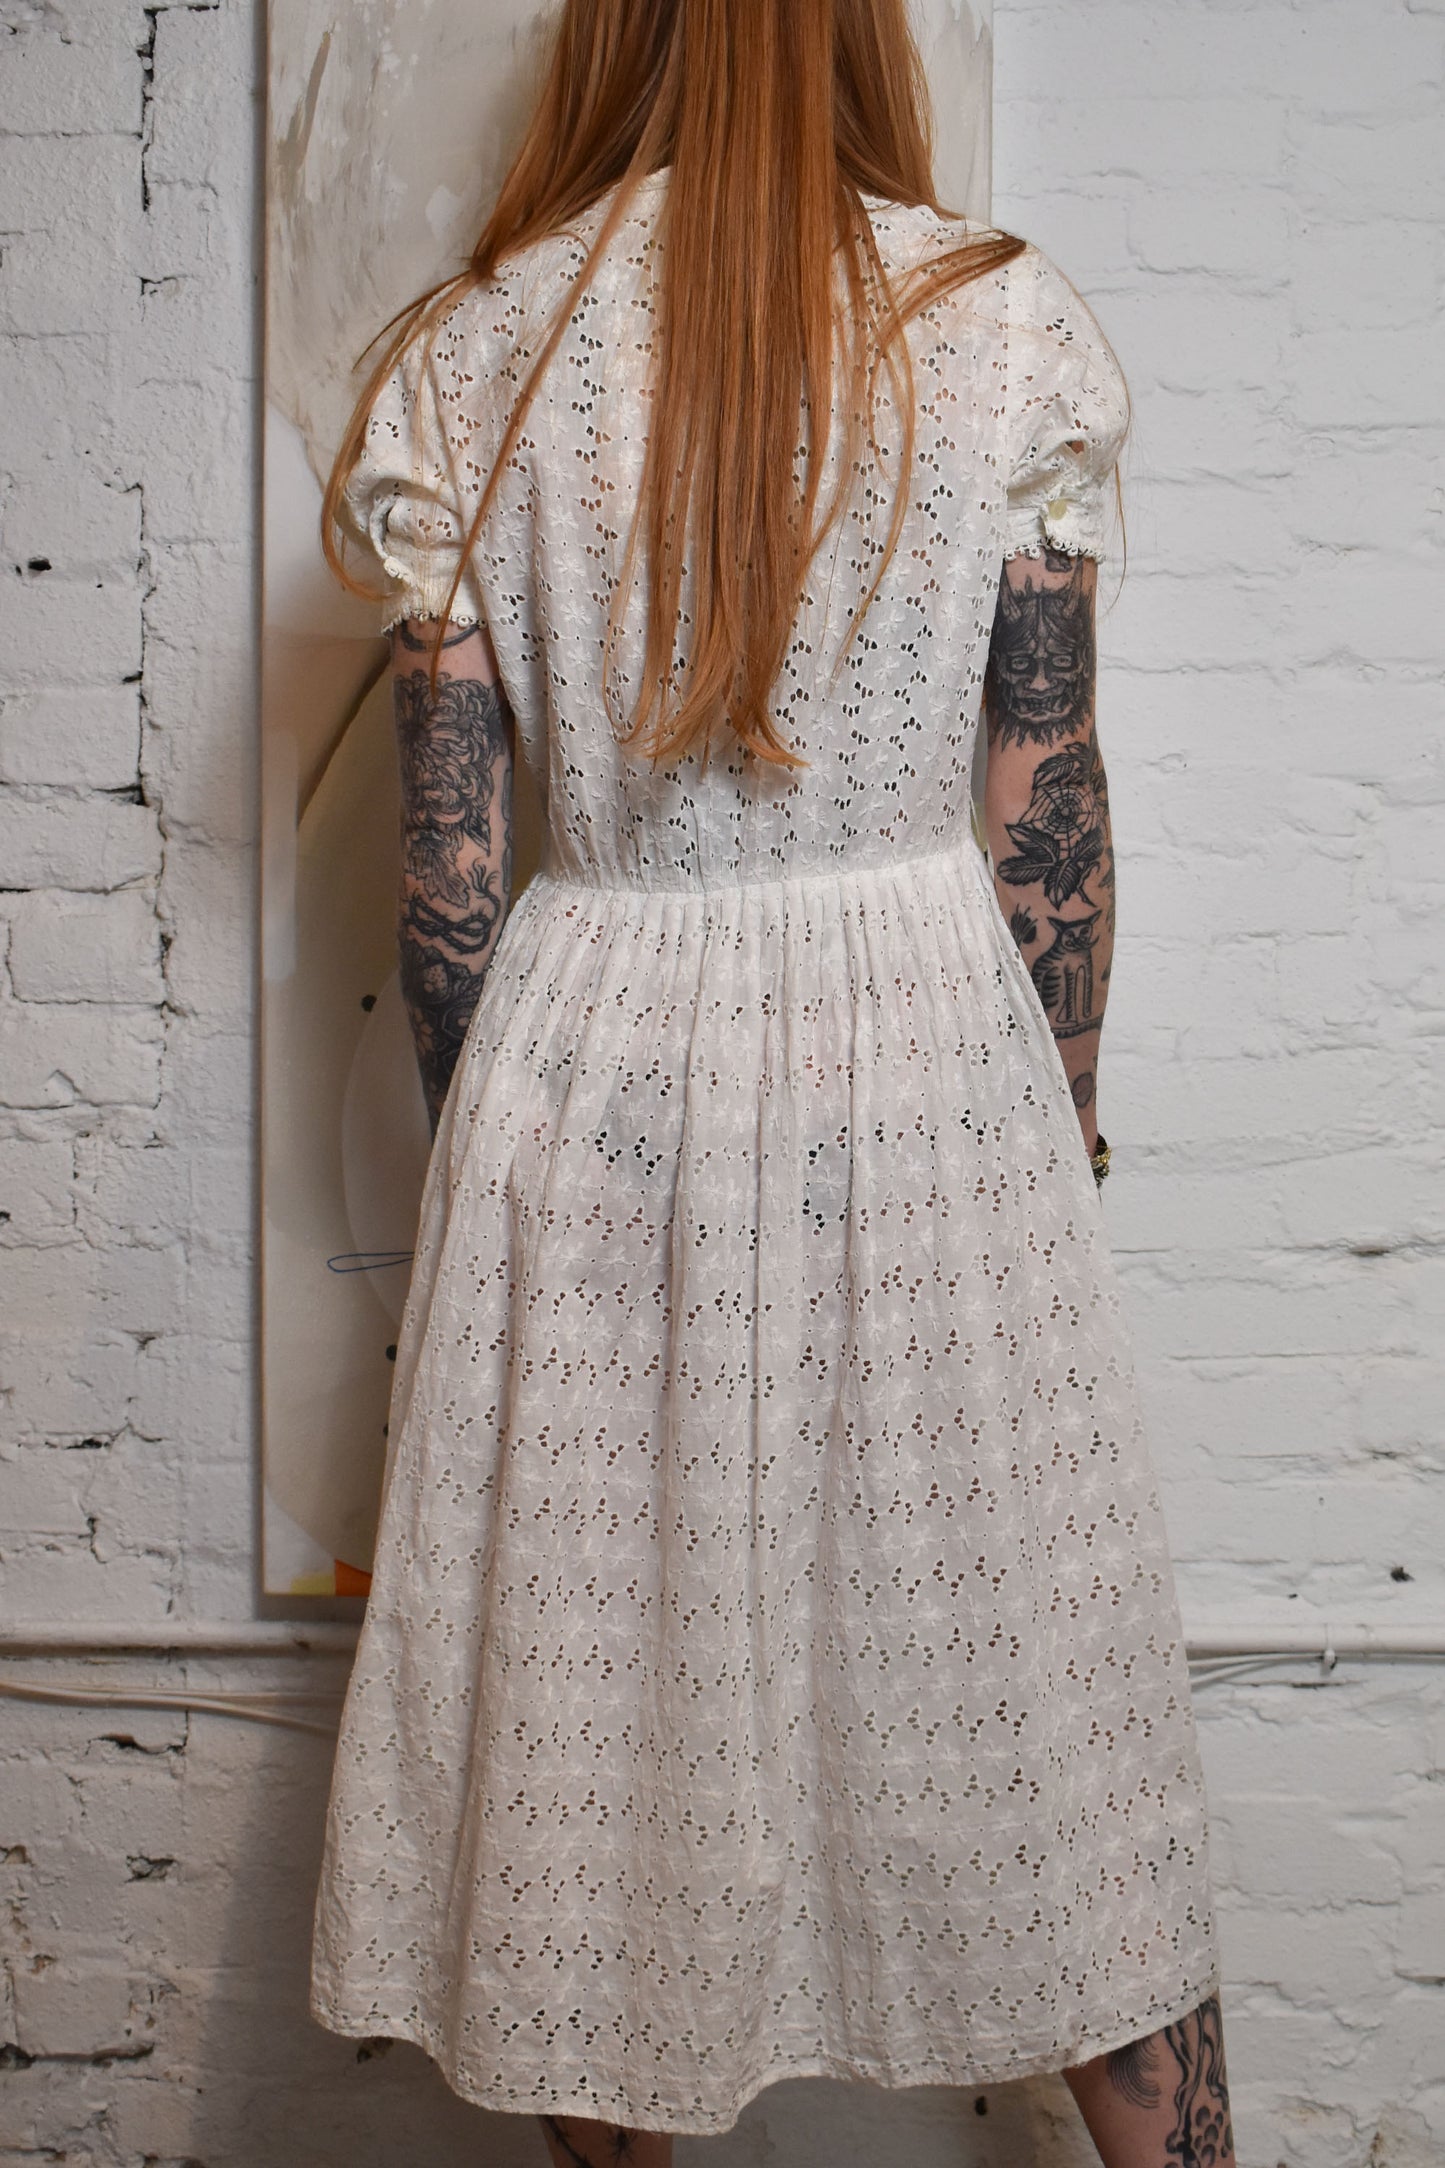 Vintage 50's White Cotton Buttonfront Eyelet Dress With Full Skirt